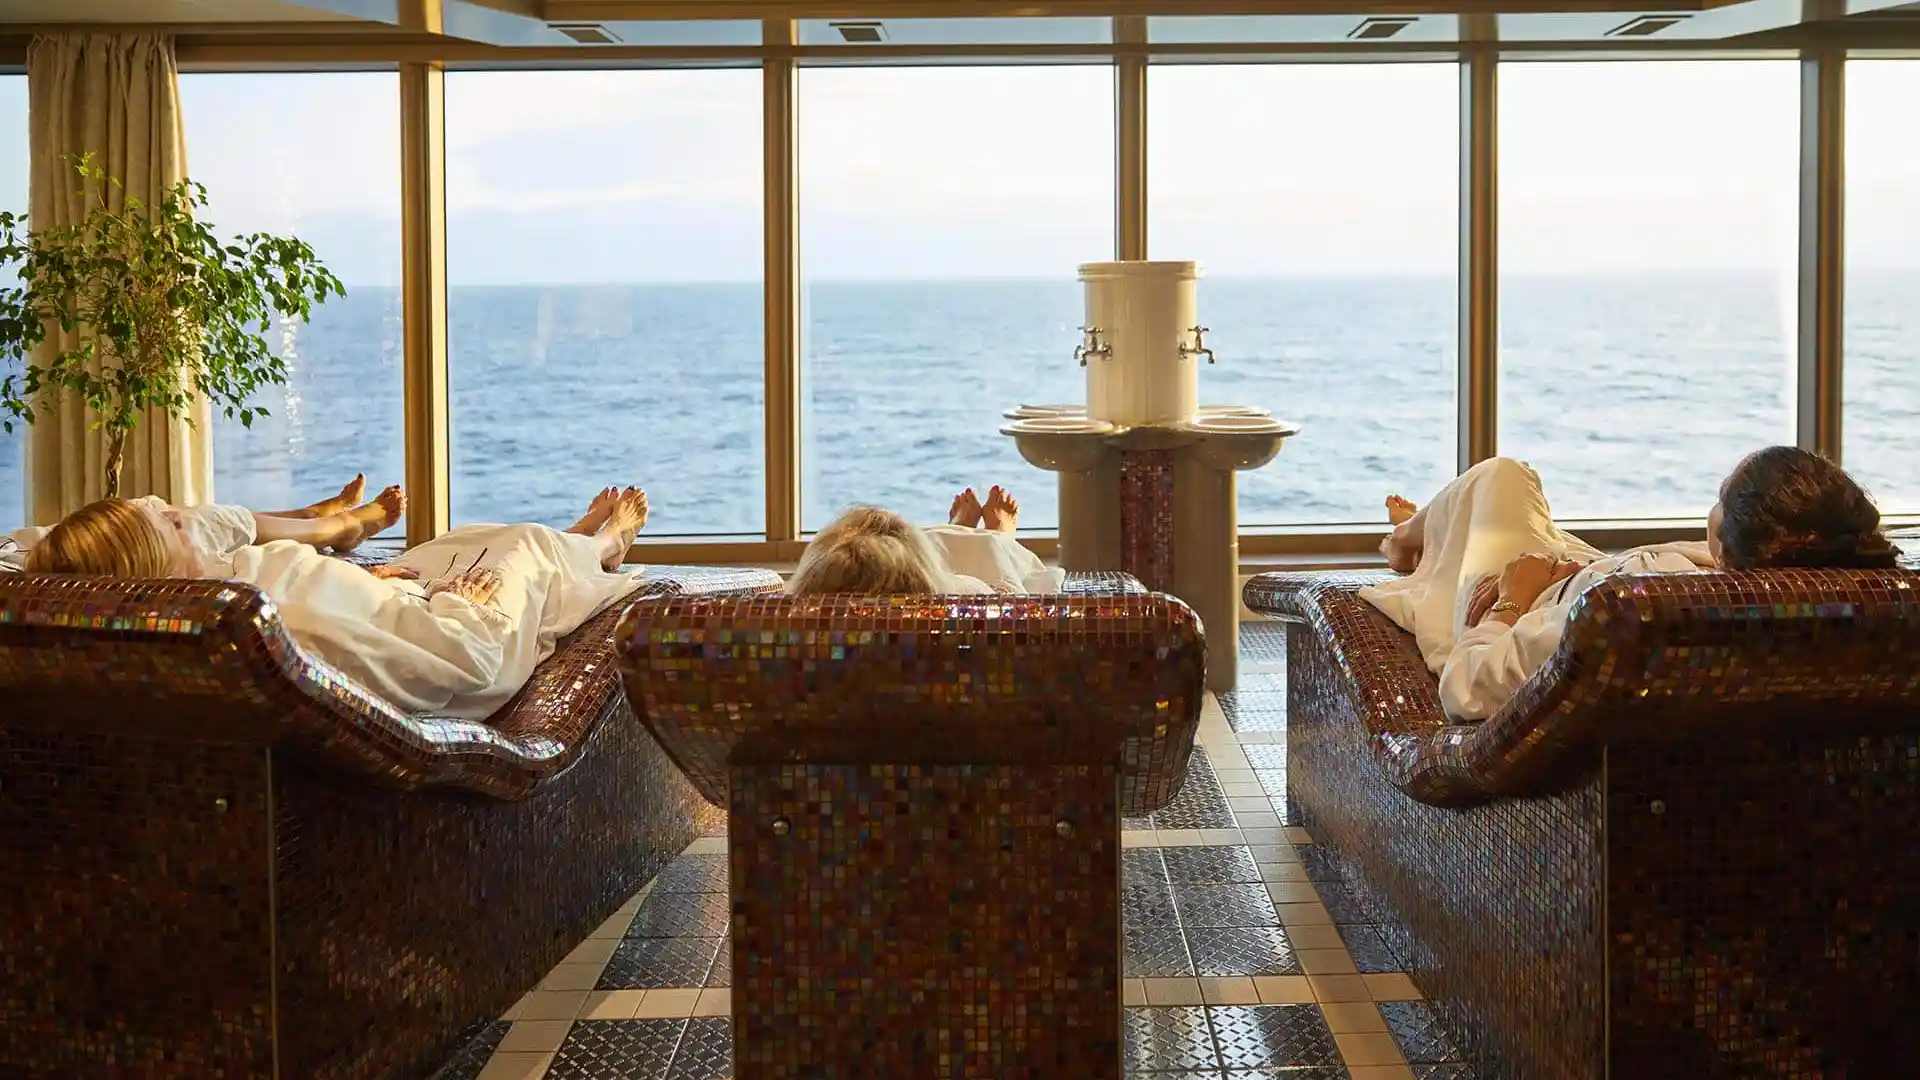 People lounging in spa with ocean views.